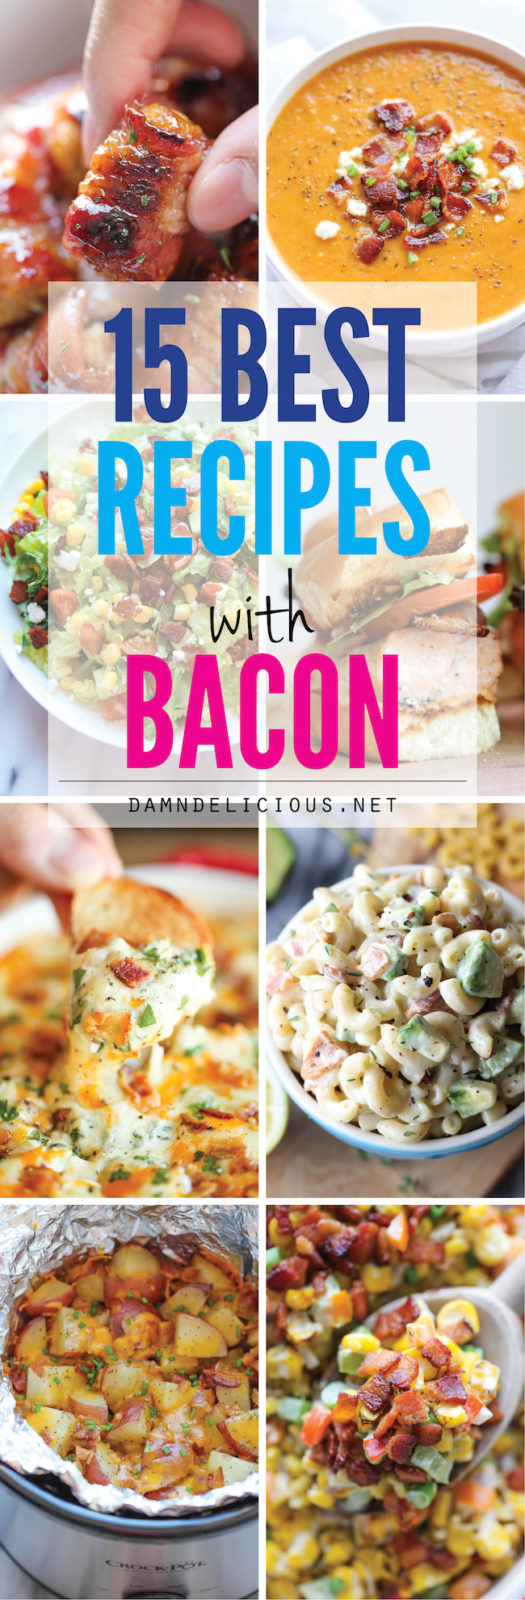 15 Best Recipes With Bacon Damn Delicious